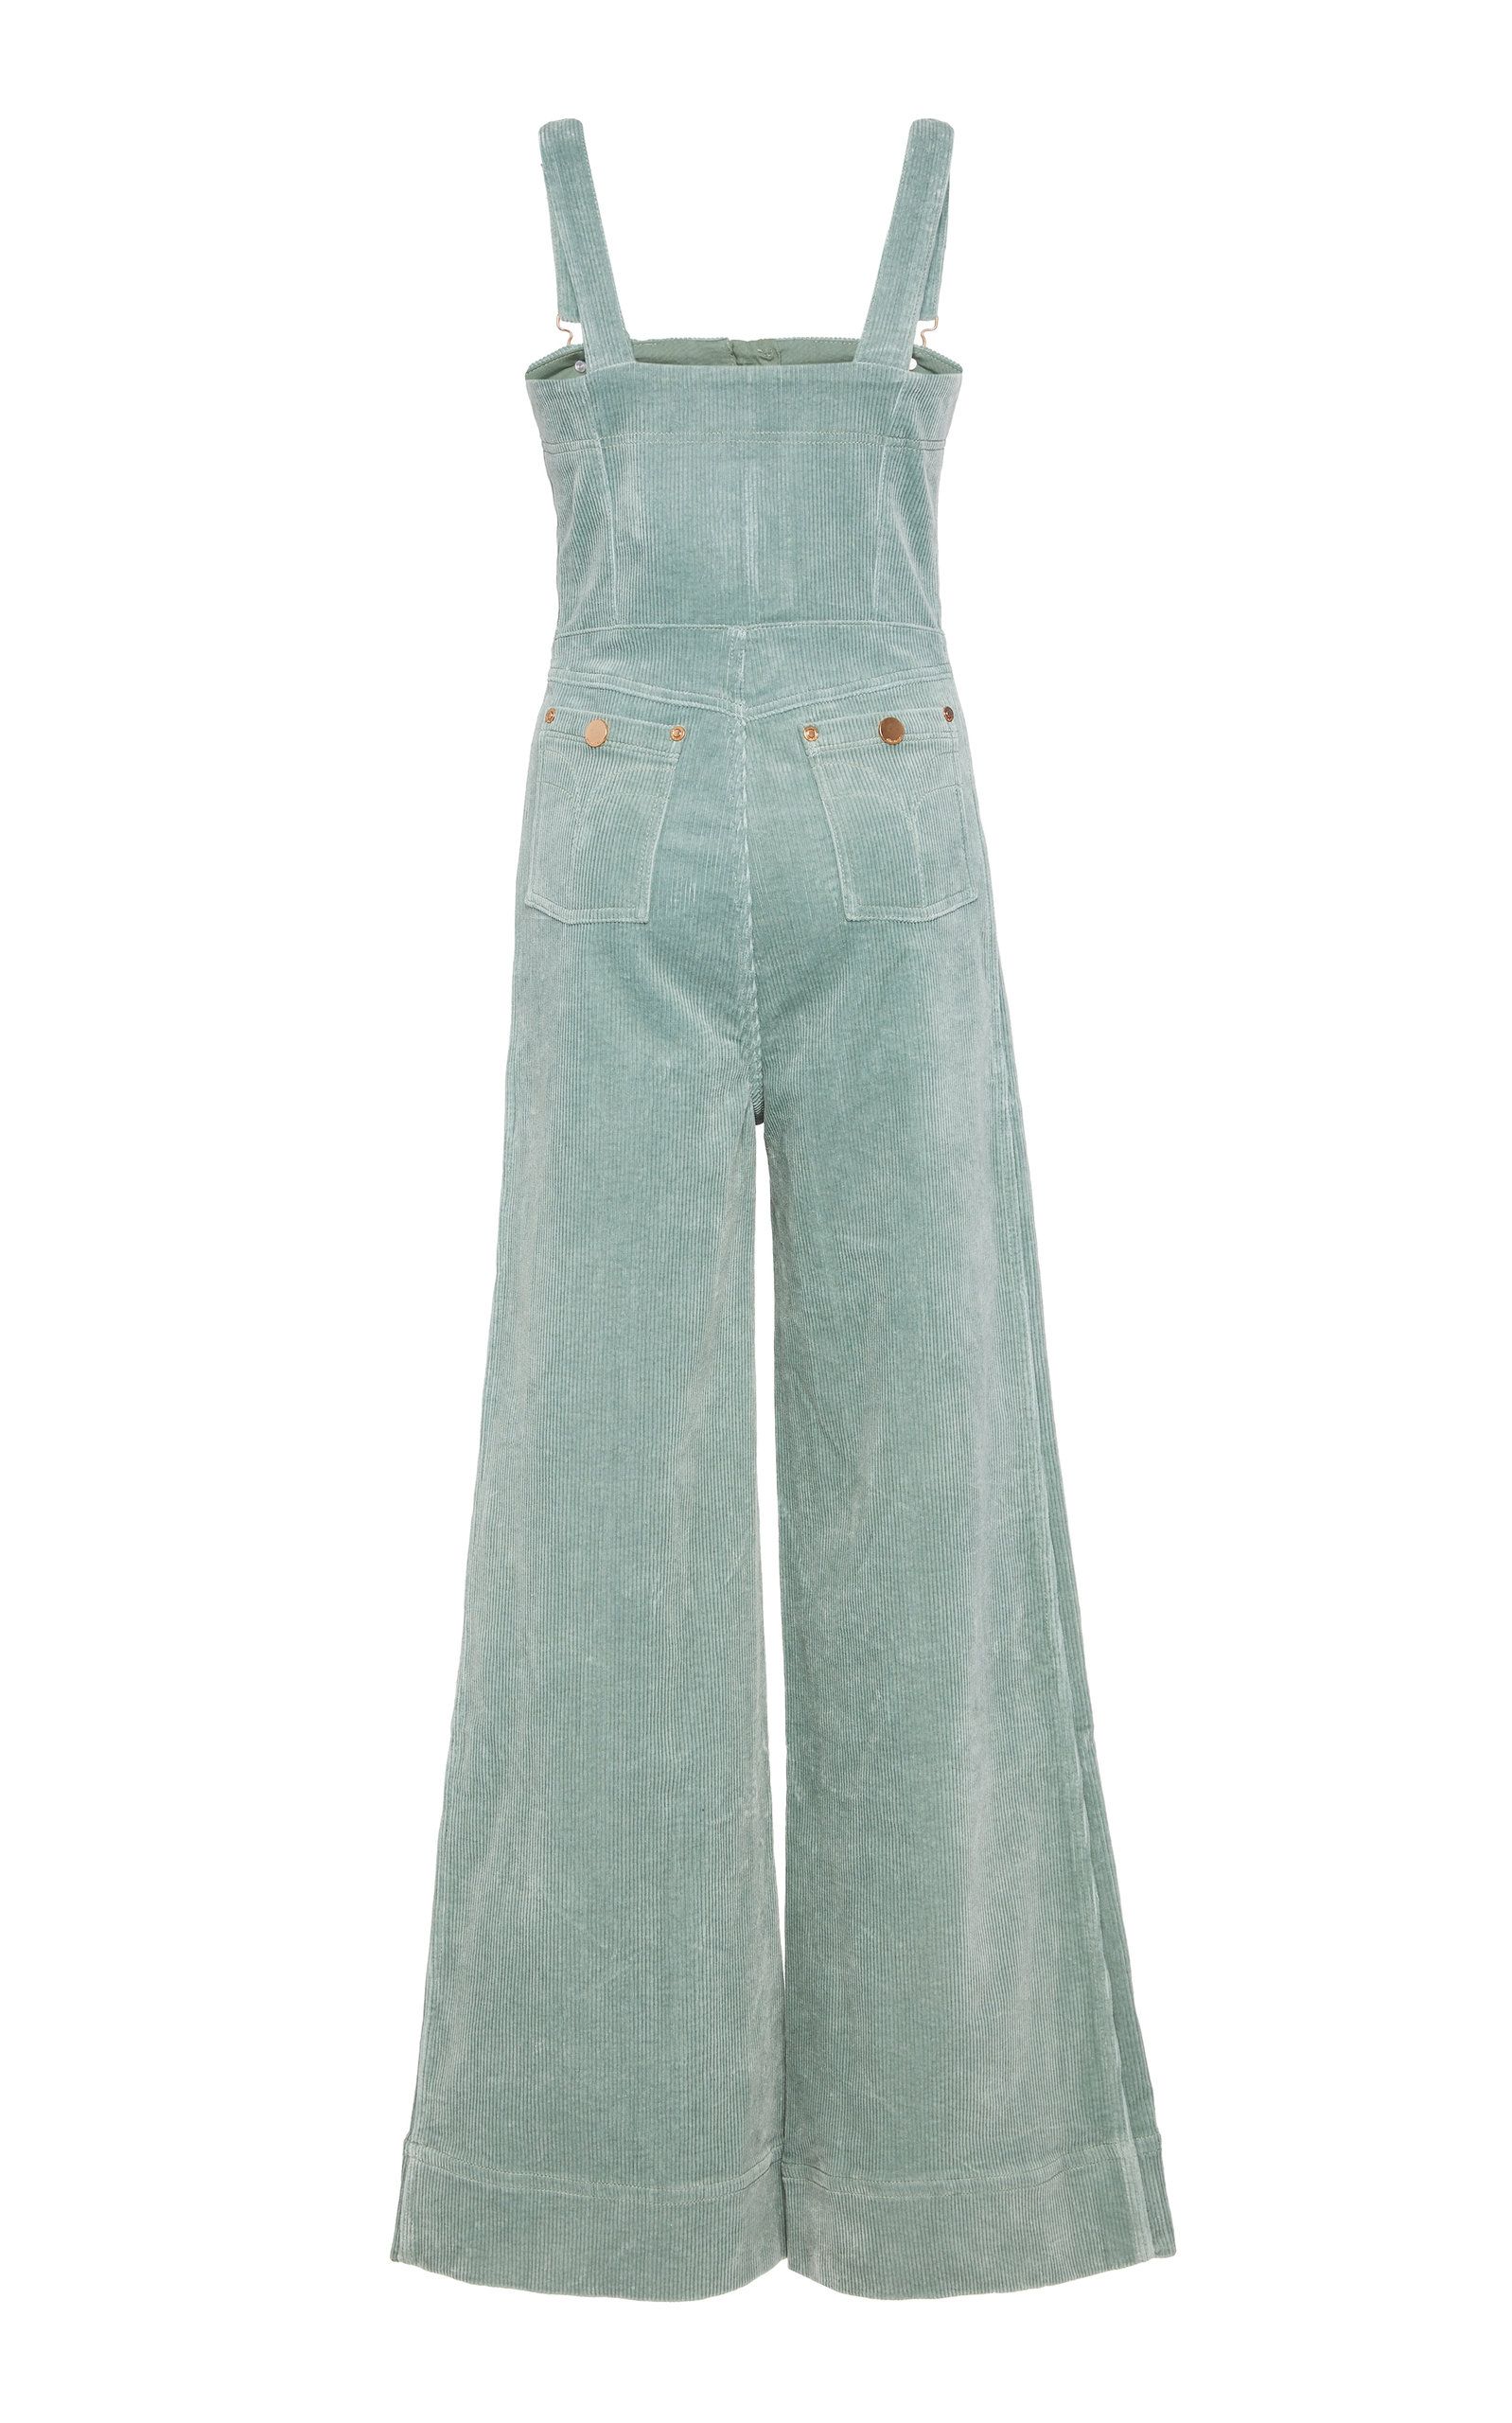 Cotton Jumpsuits: Stay Comfortable and Chic in Casual Cotton Jumpsuits